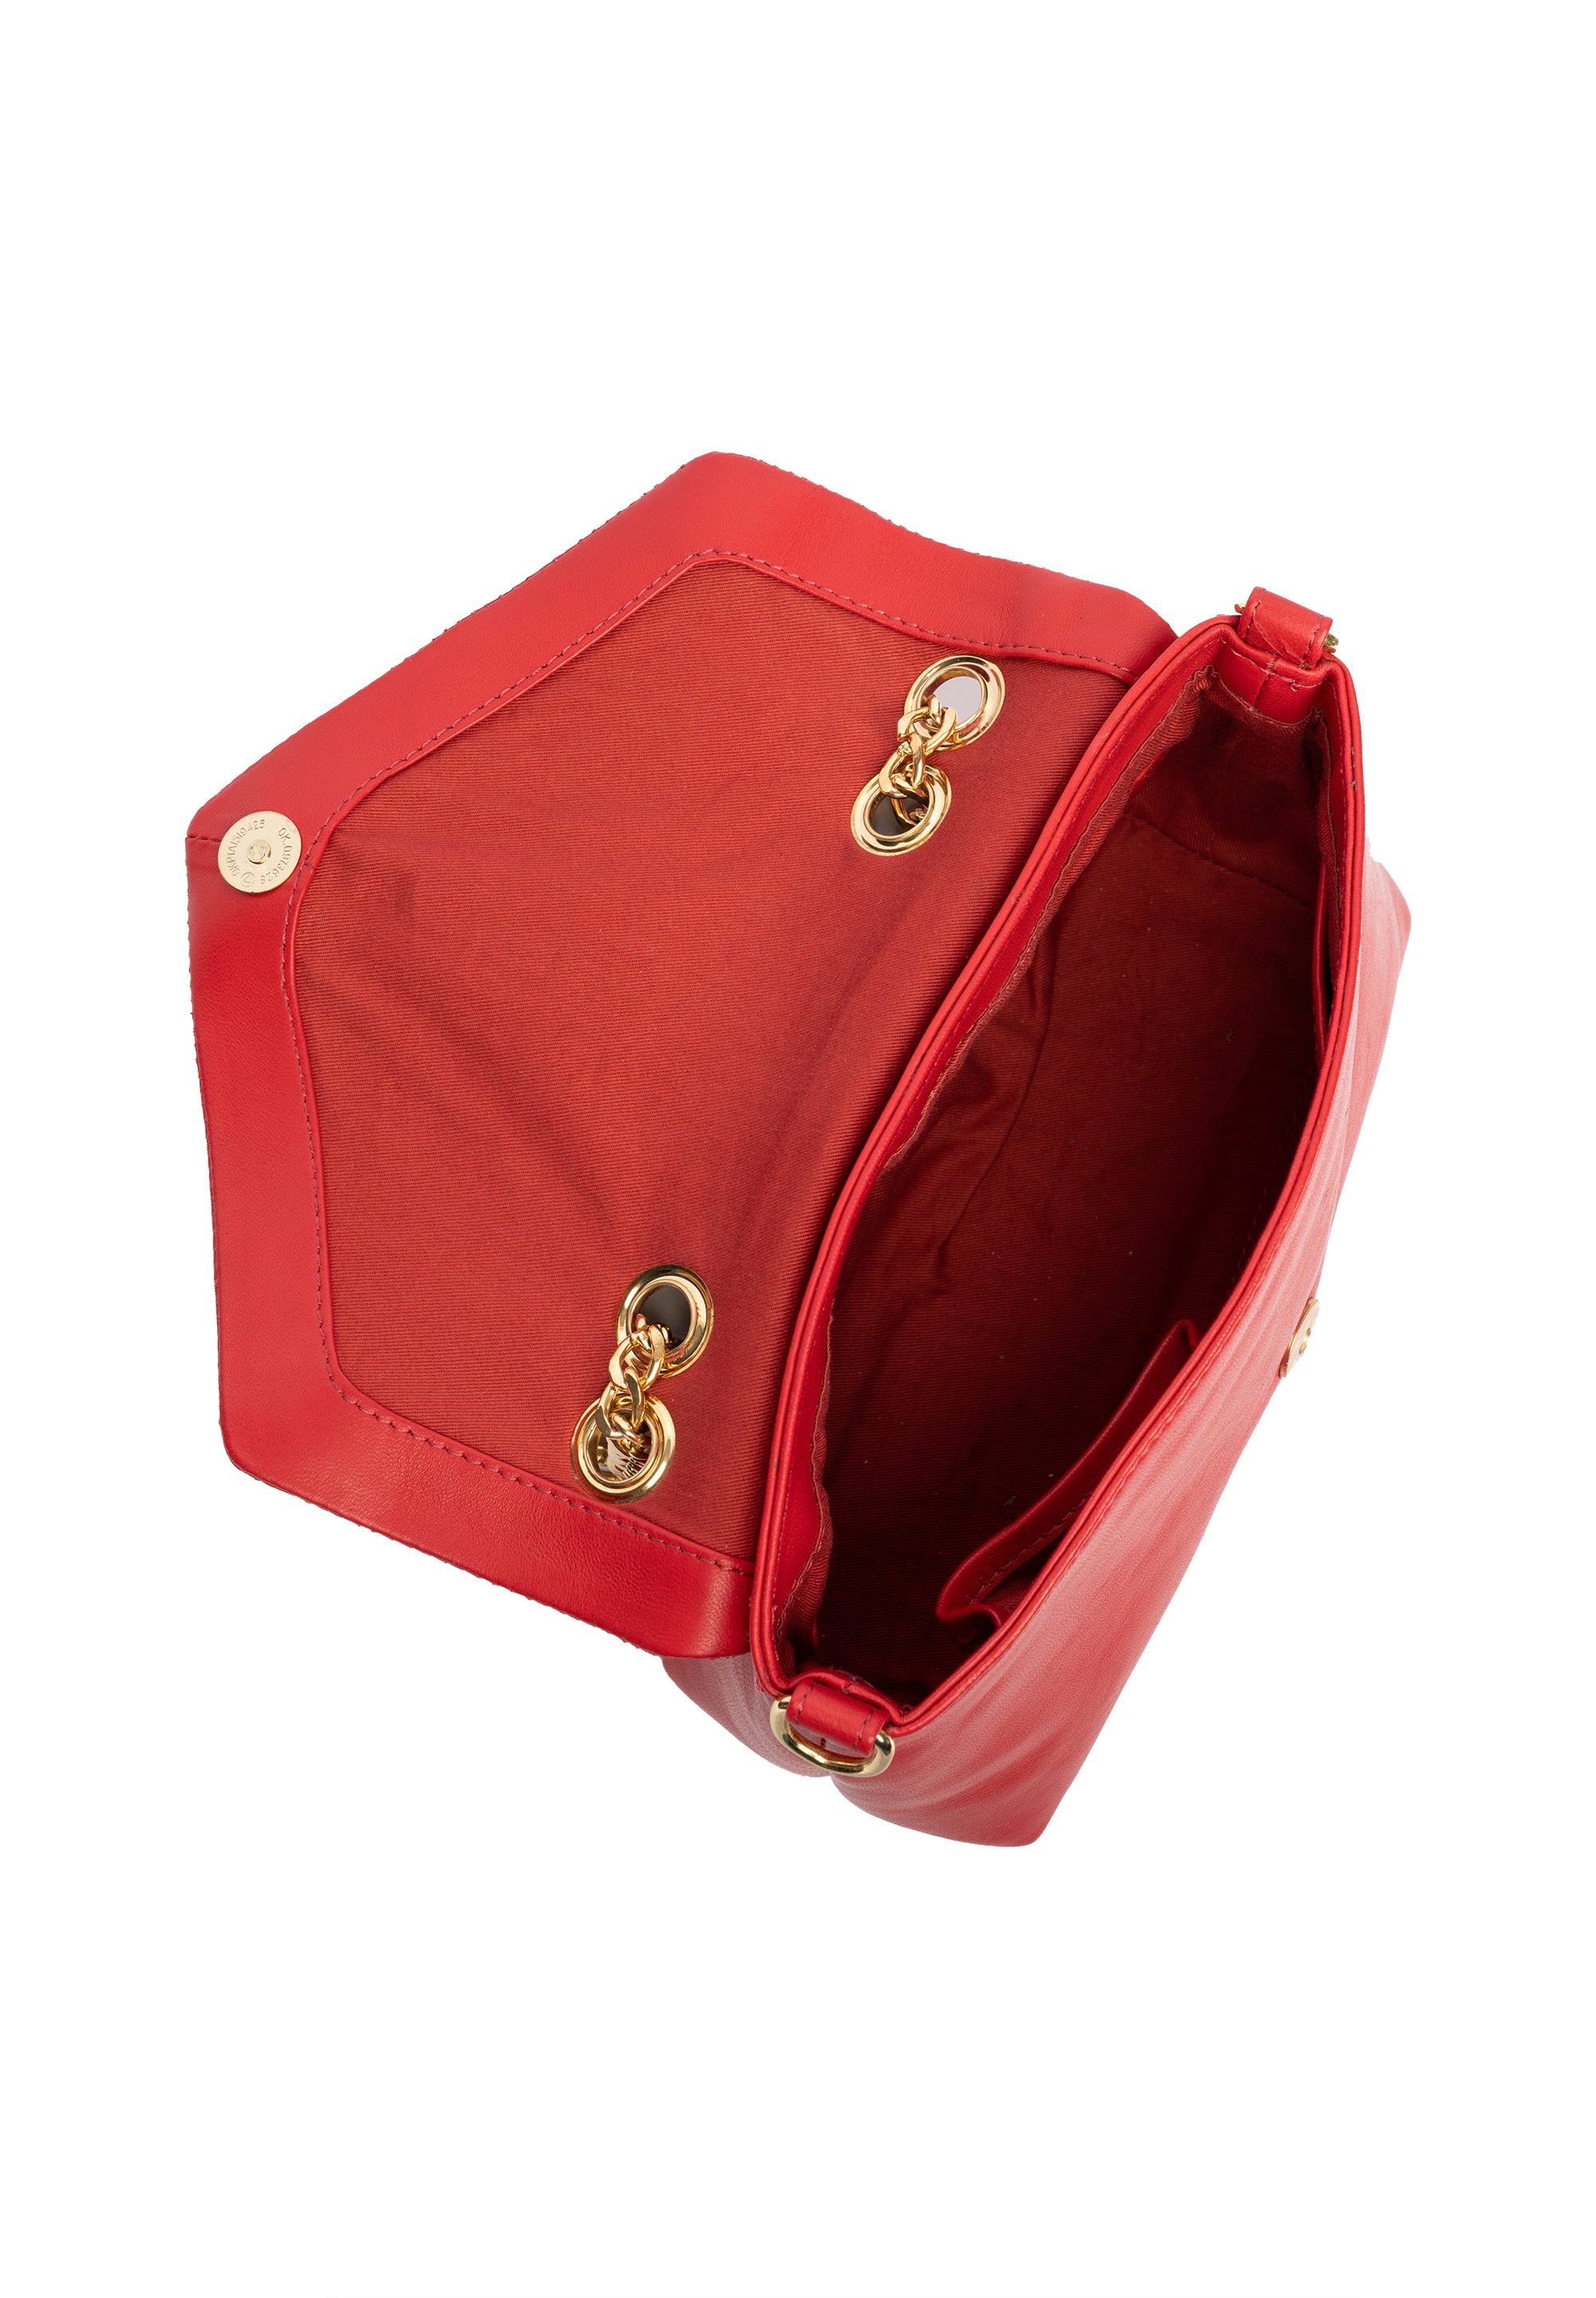 Estelle Small Bag Red